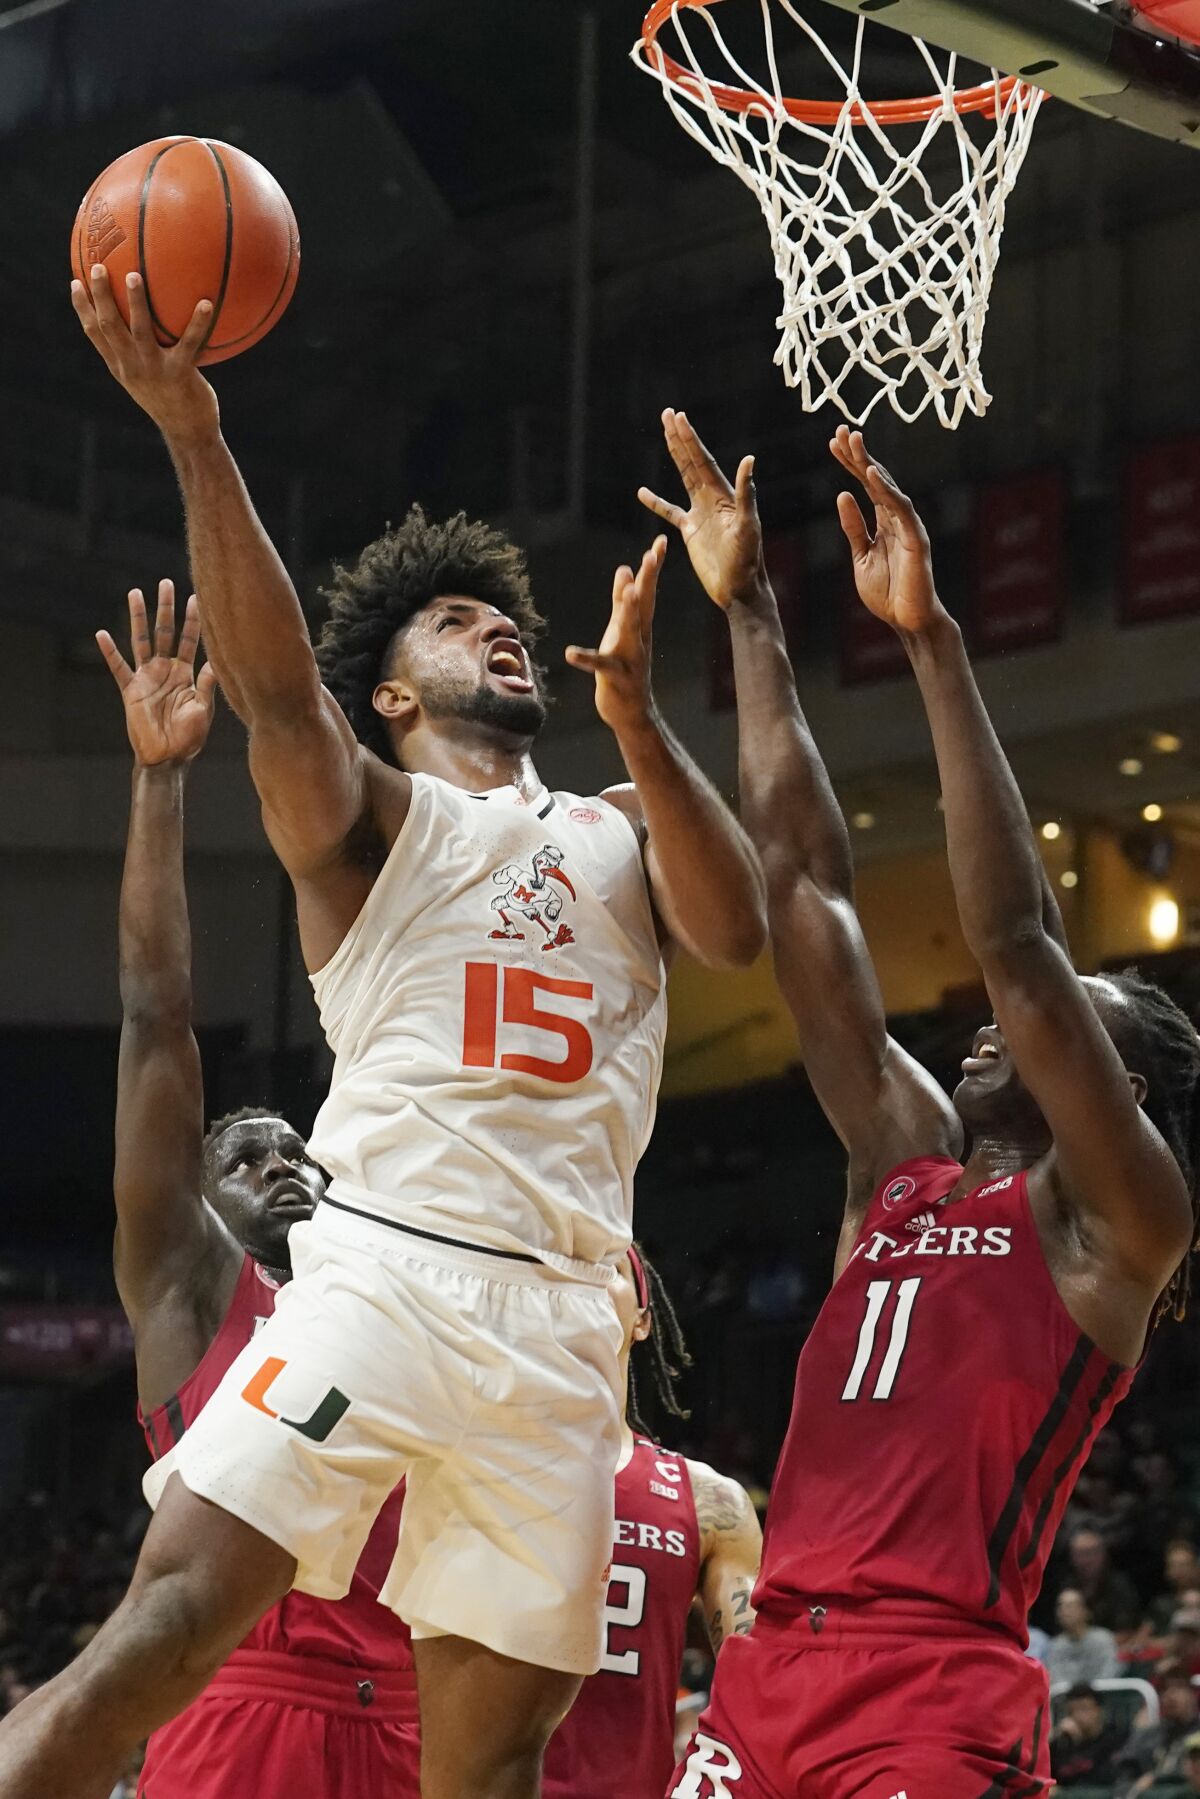 Miami's forward Norchad Omier (15) drives to the basket over Rutgers' center Clifford Omoruyi (11) during the first half of an NCAA college basketball game, Wednesday, Nov. 30, 2022, in Coral Gables, Fla. (AP Photo/Marta Lavandier)